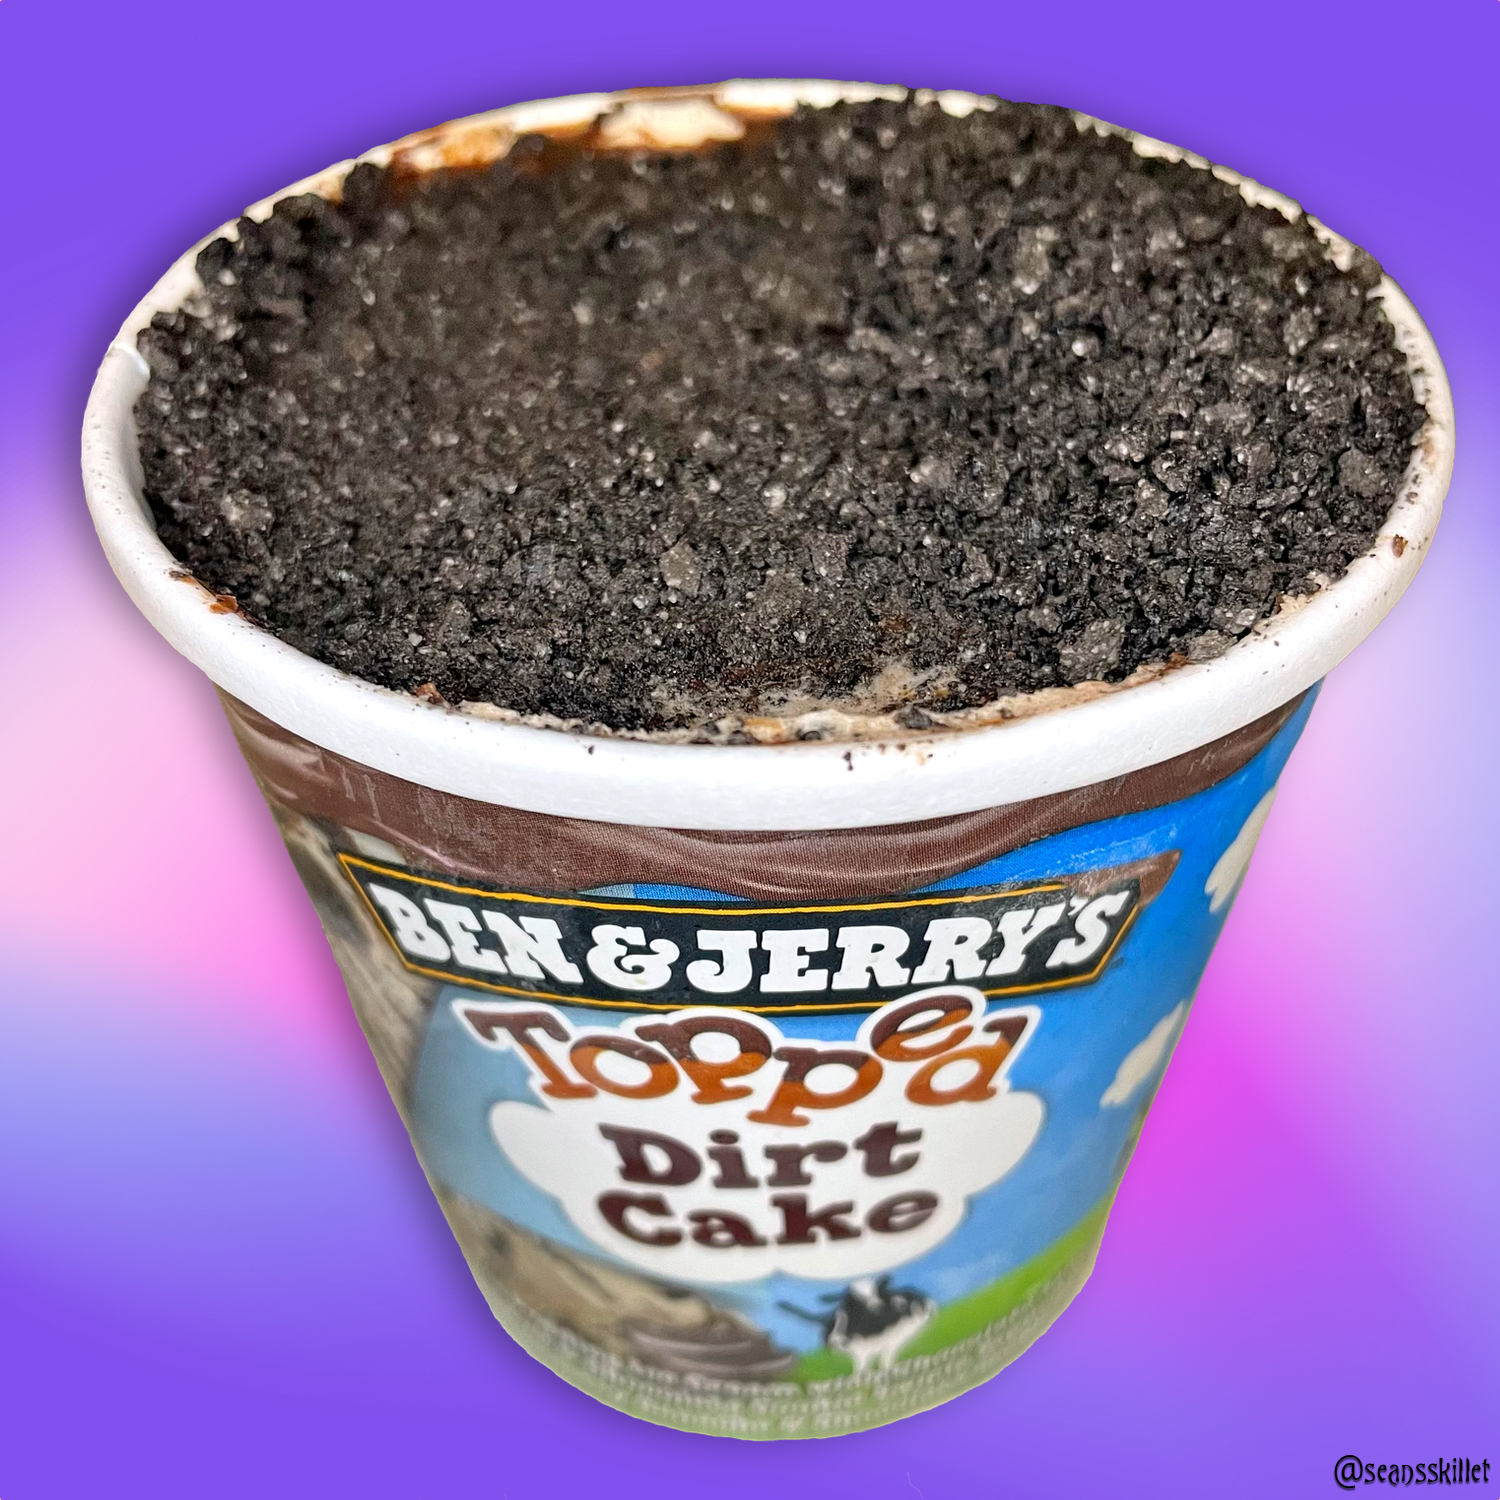 Knop Edition smerte REVIEW: Ben & Jerry's Topped Dirt Cake | Sean's Skillet